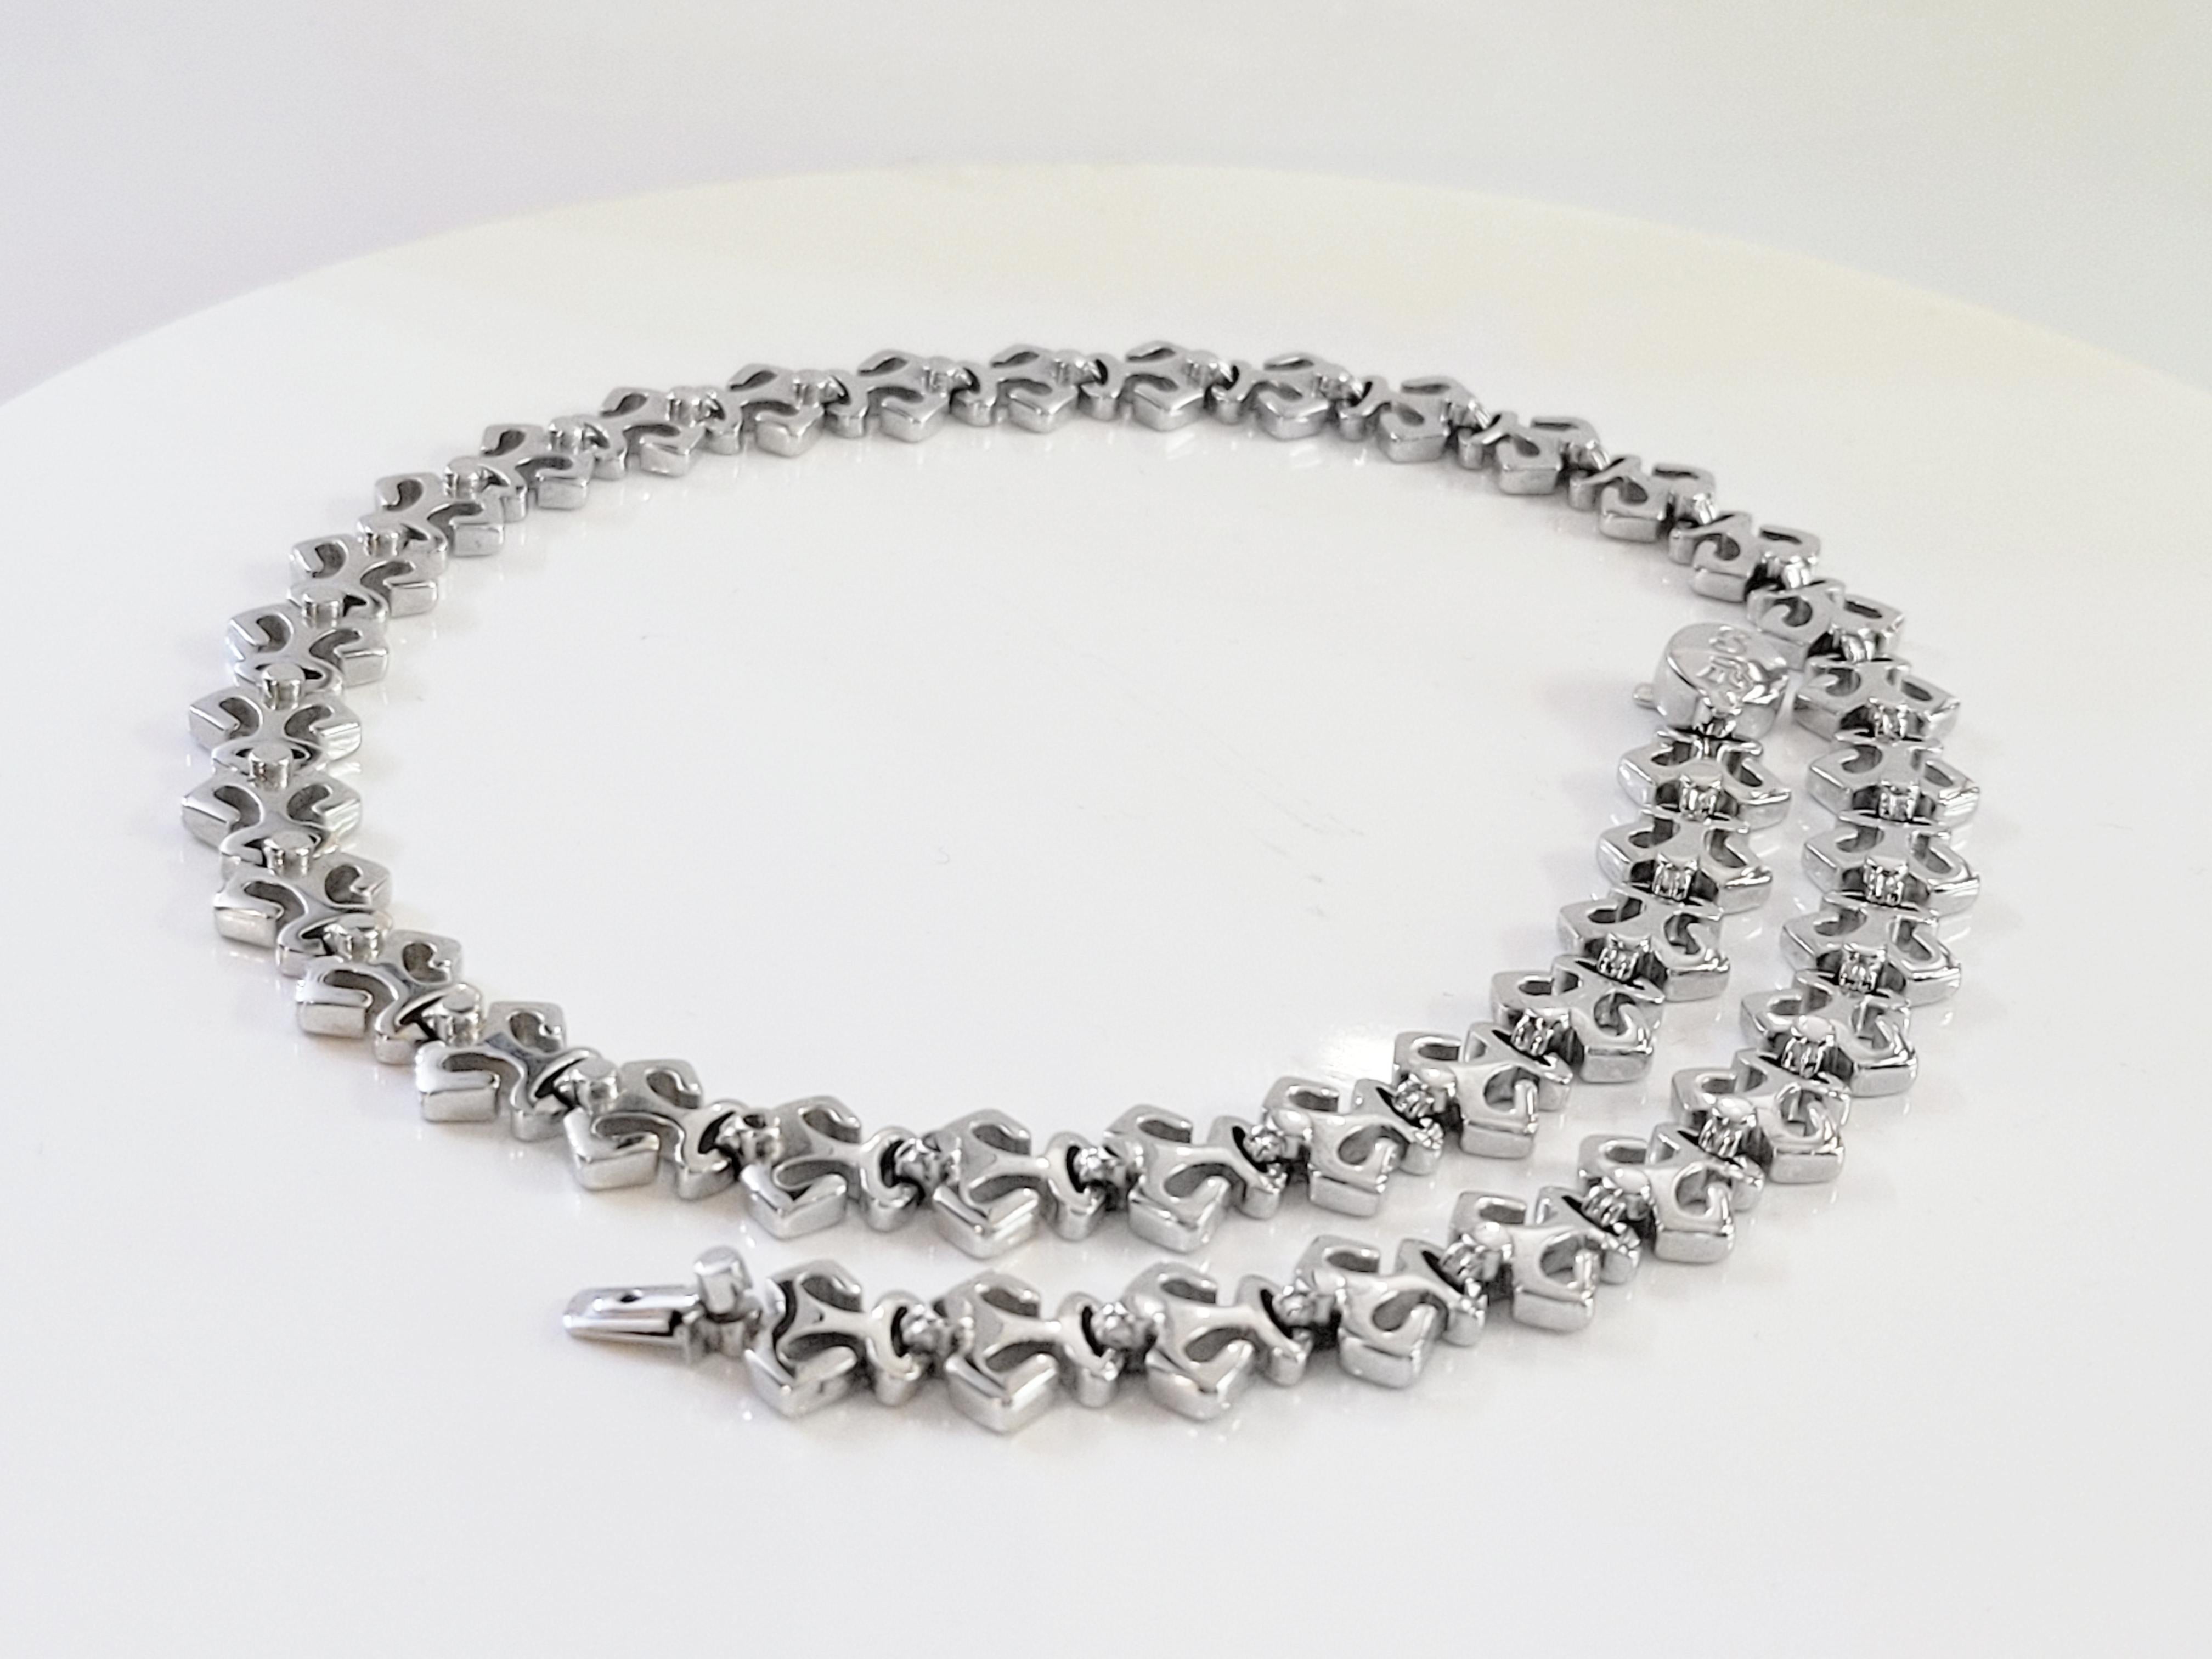 Garrard necklace 
18K White gold
Necklace Length 16''
Width 10.8mm
Weight 83.1gr
Retail price: $26000